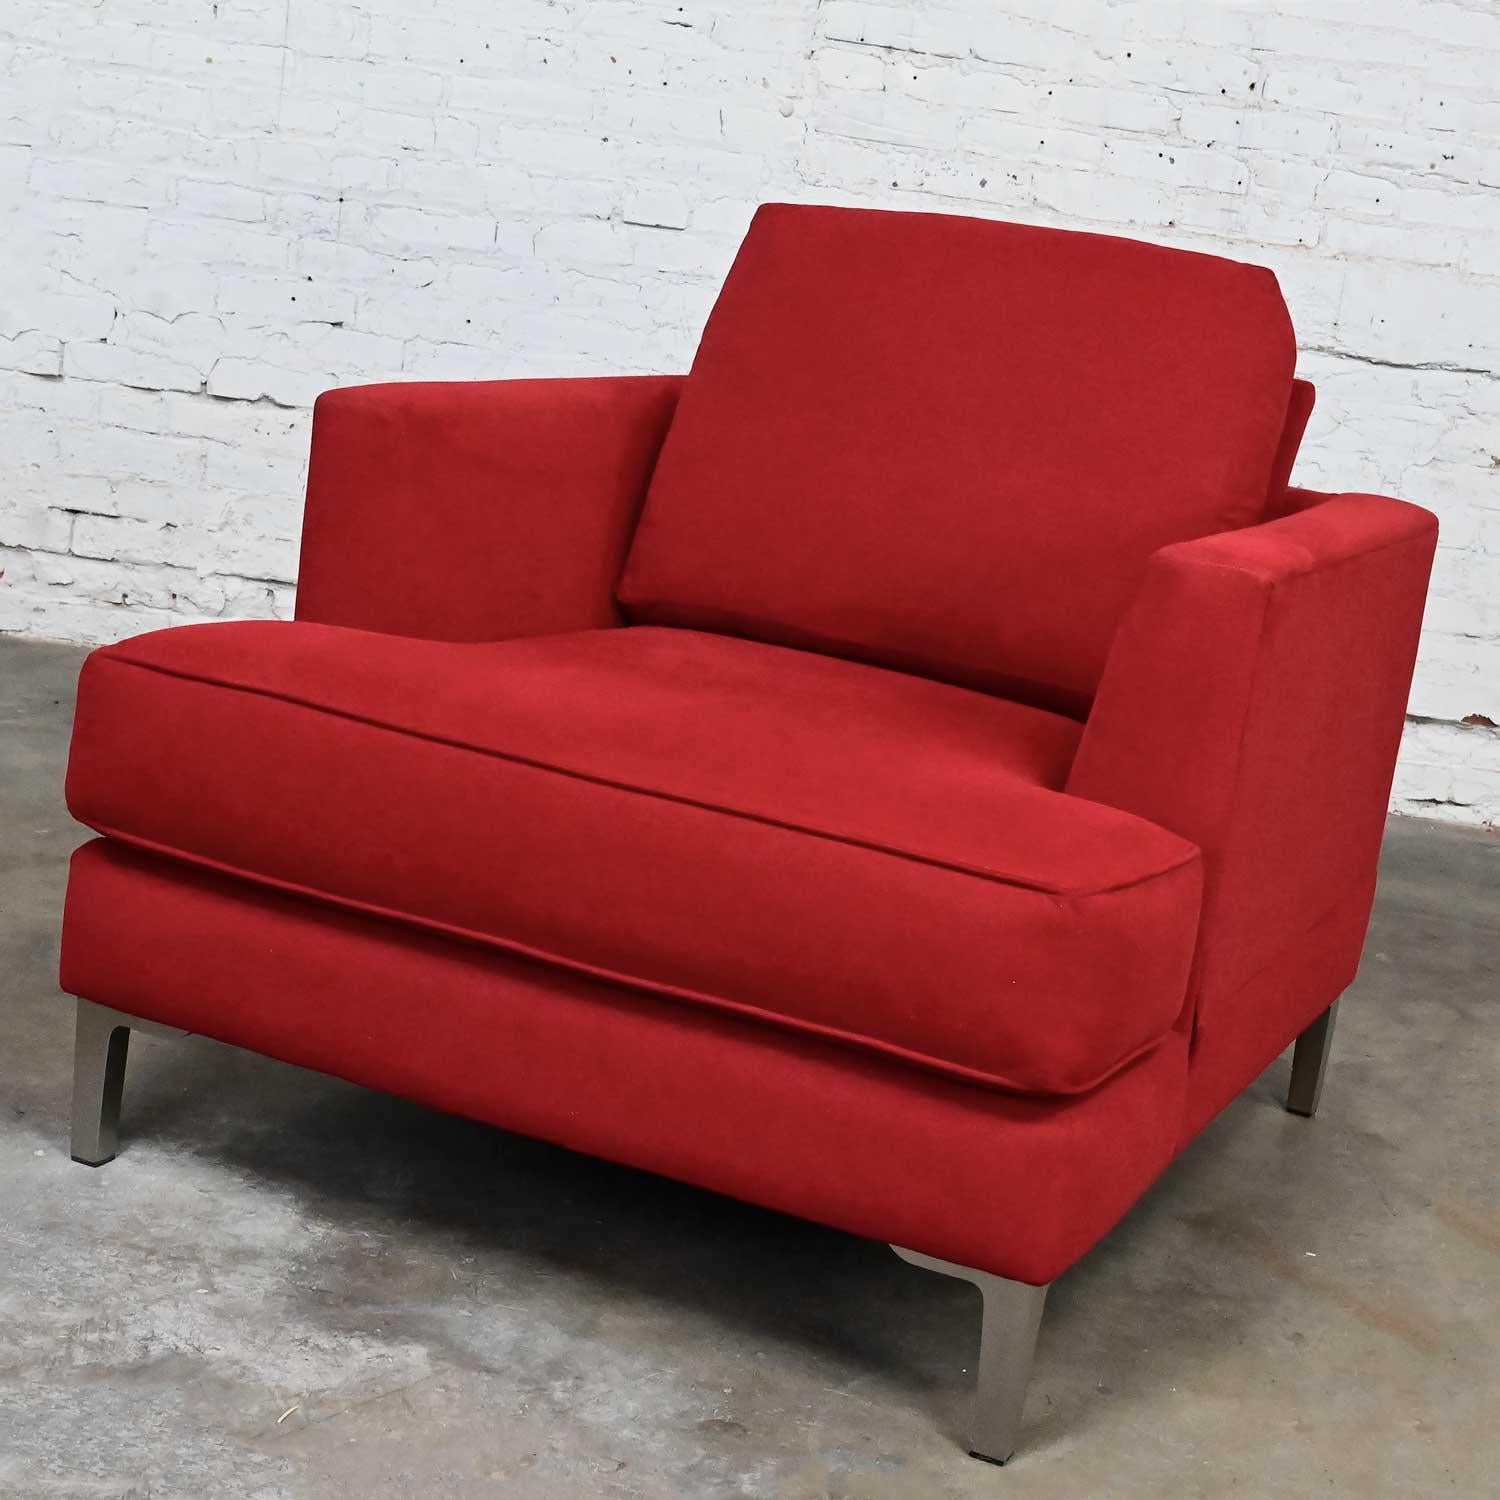 American Modern Carter Club Chair Attr Zen Collection Bright Red with Polished Steel Legs For Sale